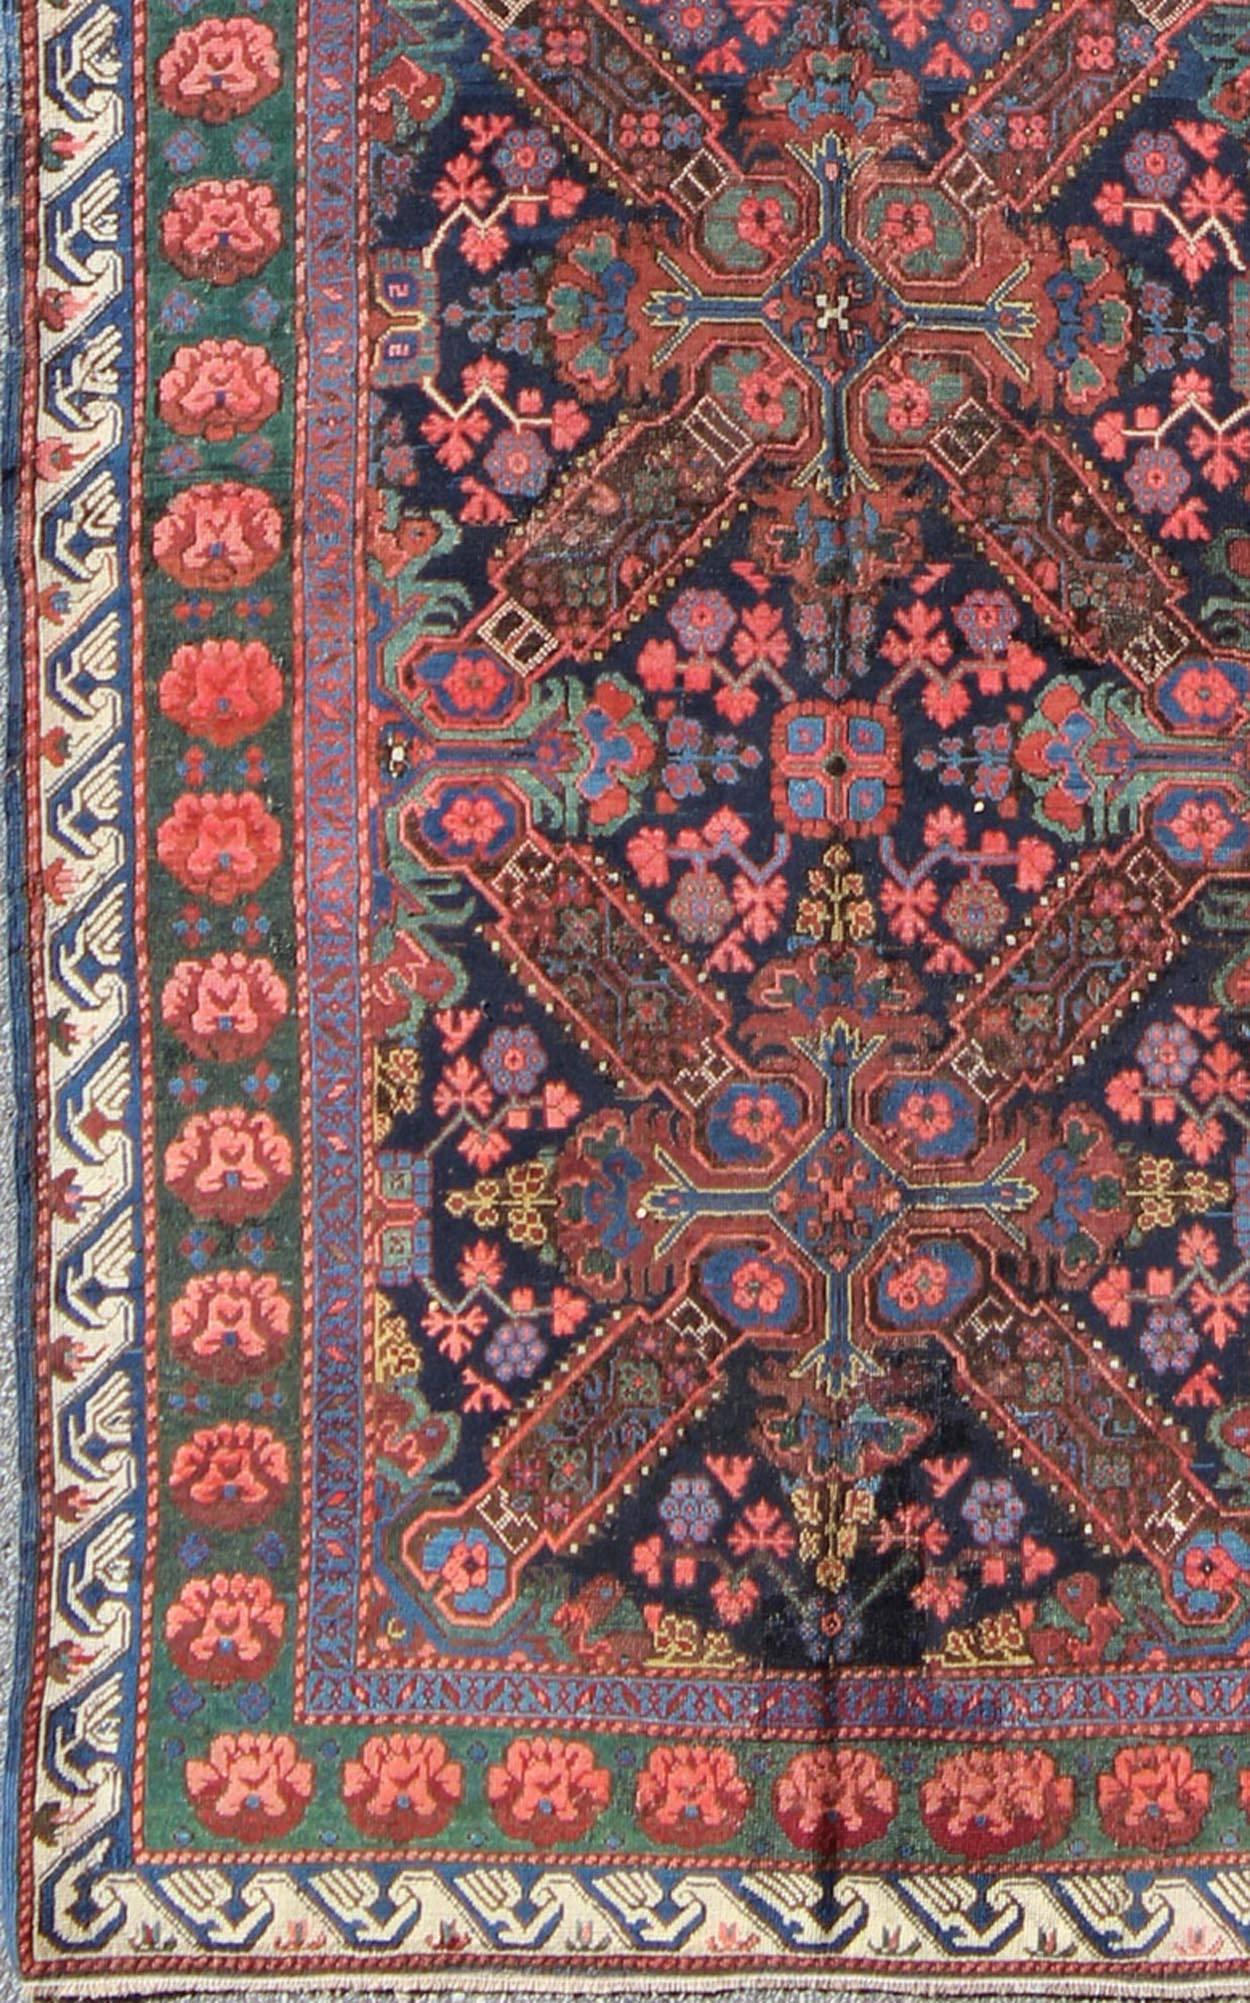 Set on an indigo background this antique 19th Century Seychour Caucasian rug features four intricate medallions composed of delightful rich colors. The entire piece is surrounded by multiple complementary floral borders. This rug features various